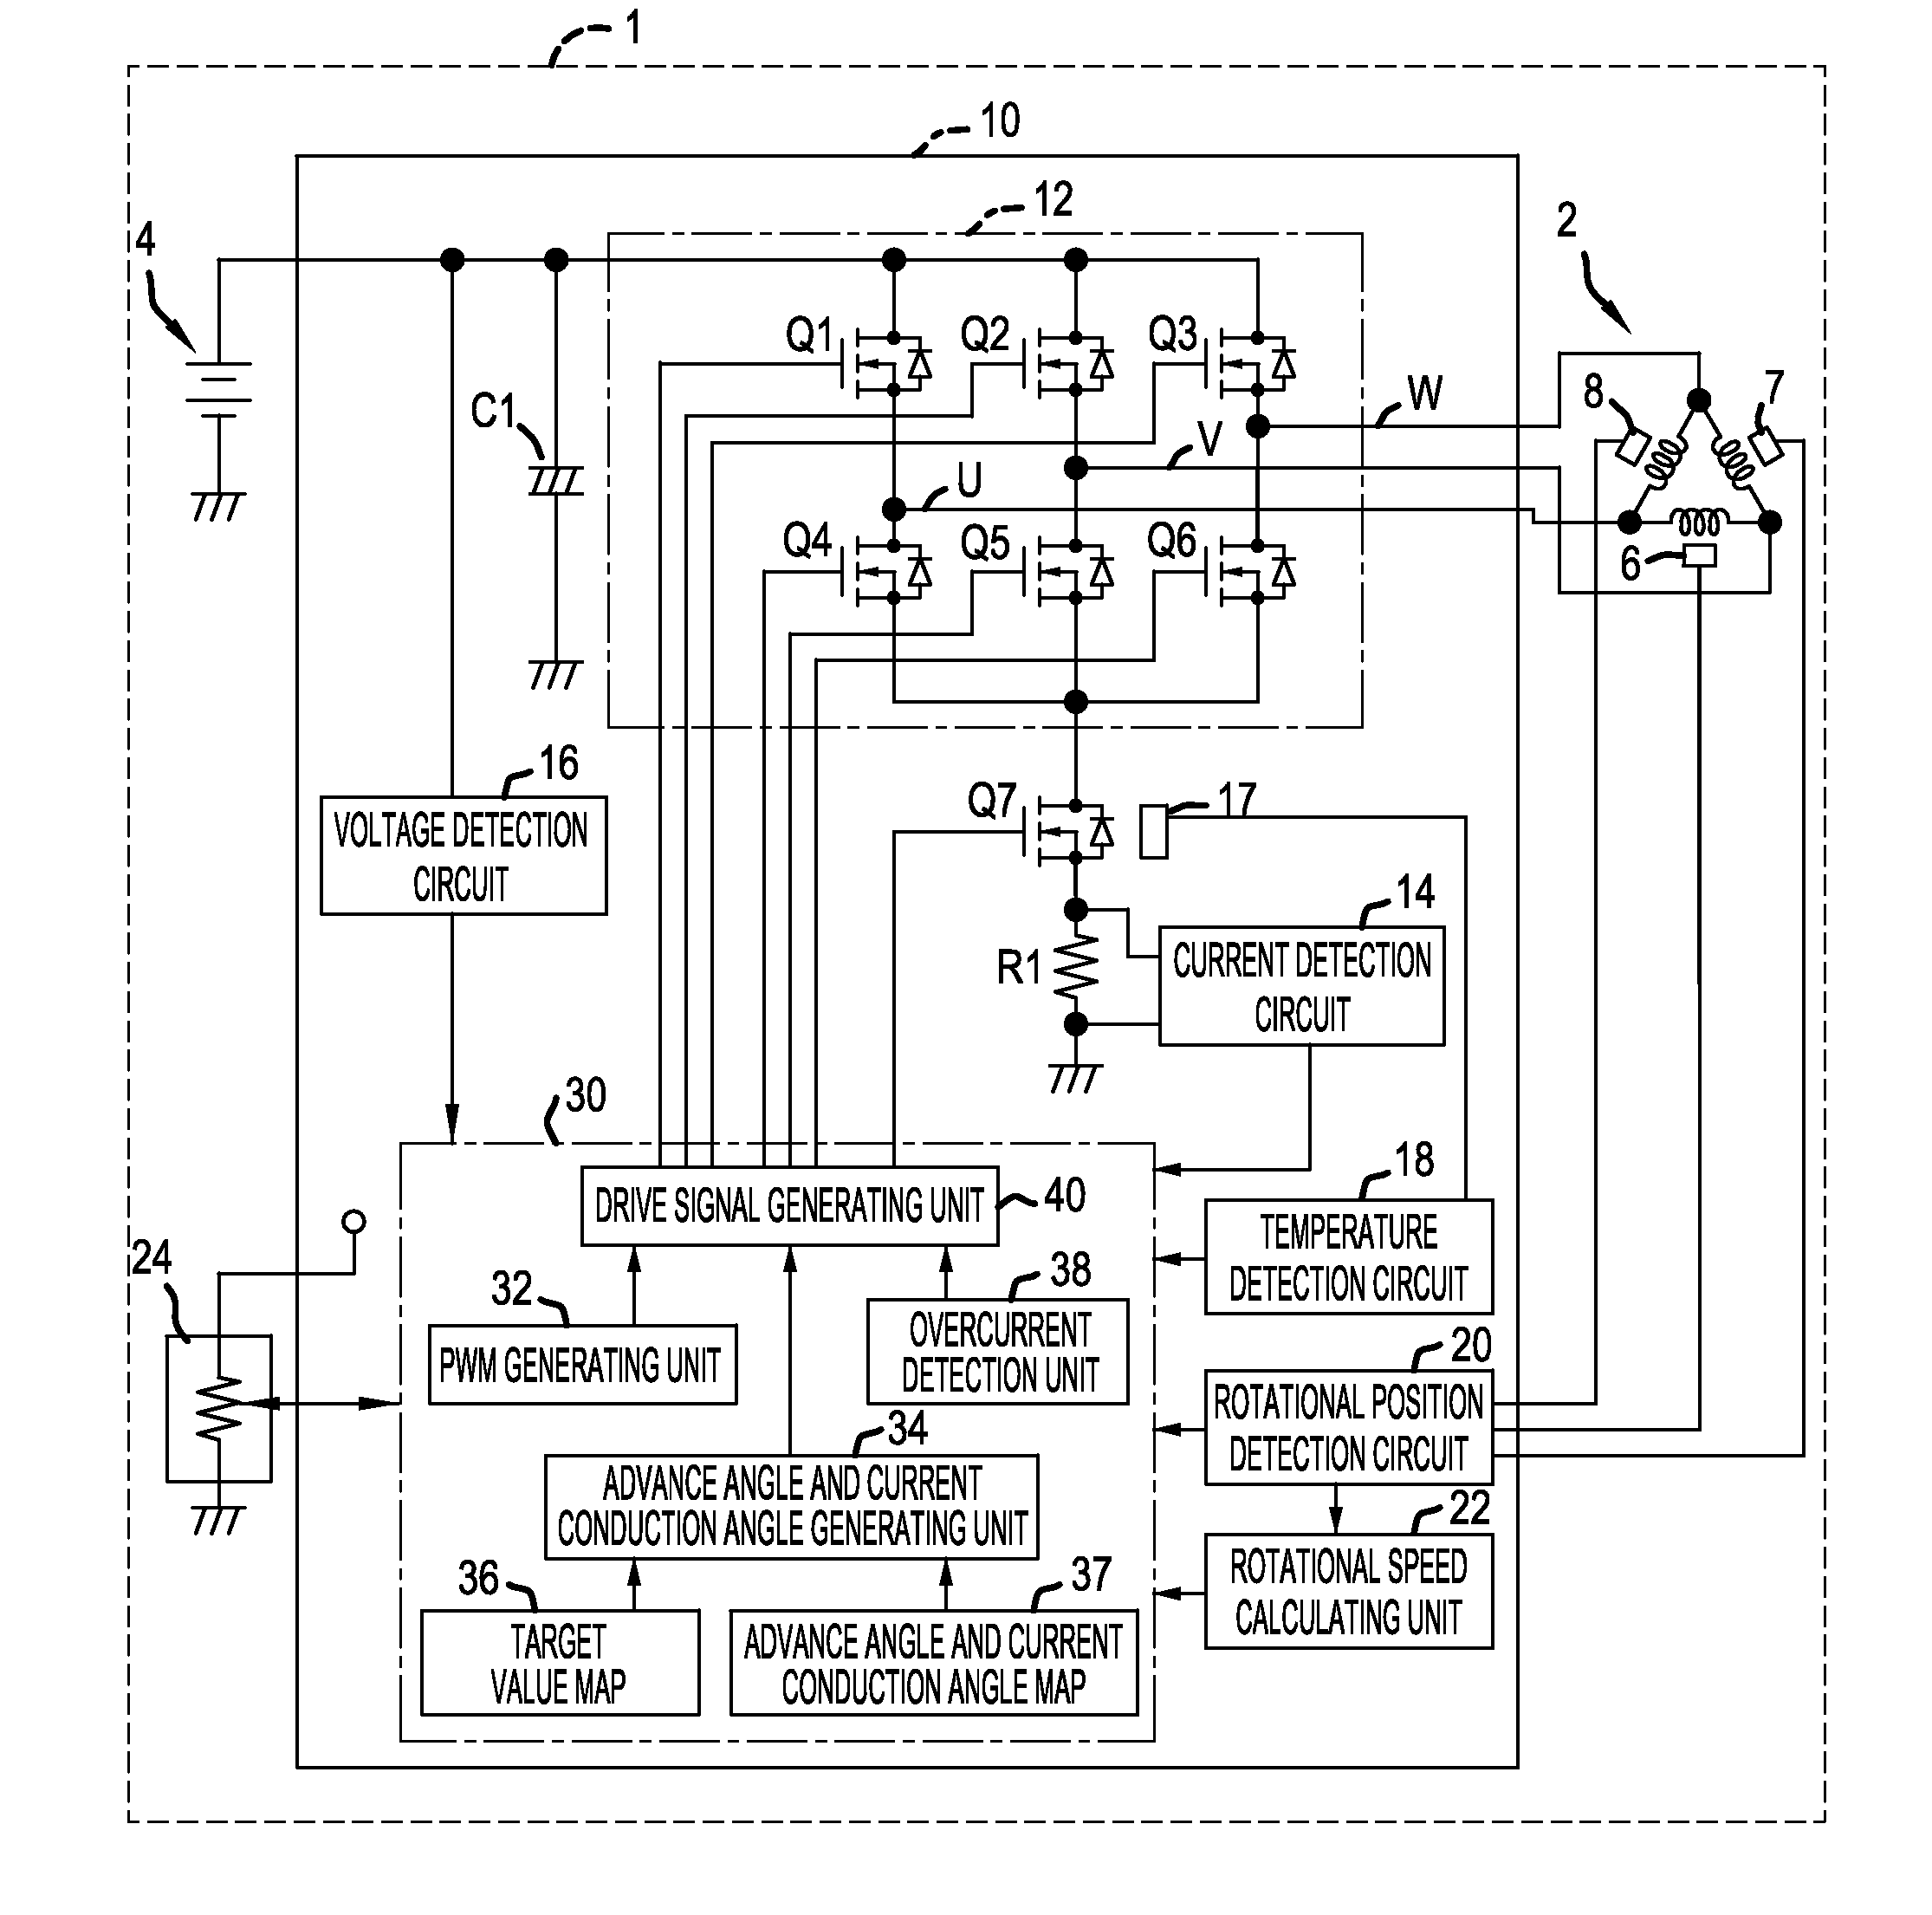 Power tool having a brushless motor and a control unit for controlling the brushless motor